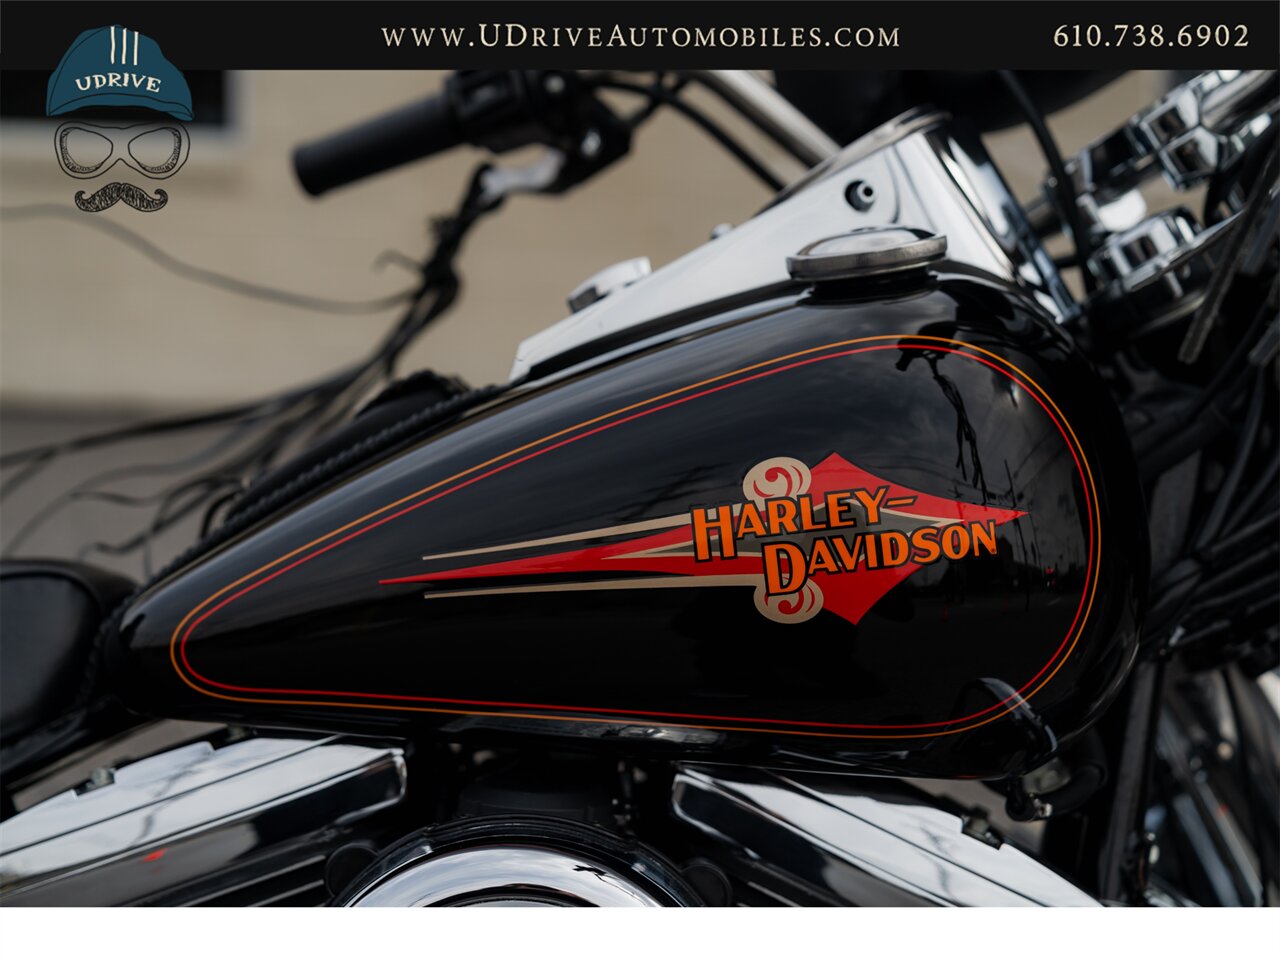 1994 Harley-Davidson Touring FLSTC  Heritage Softail Classic 2k Miles 1 Owner Service History - Photo 10 - West Chester, PA 19382